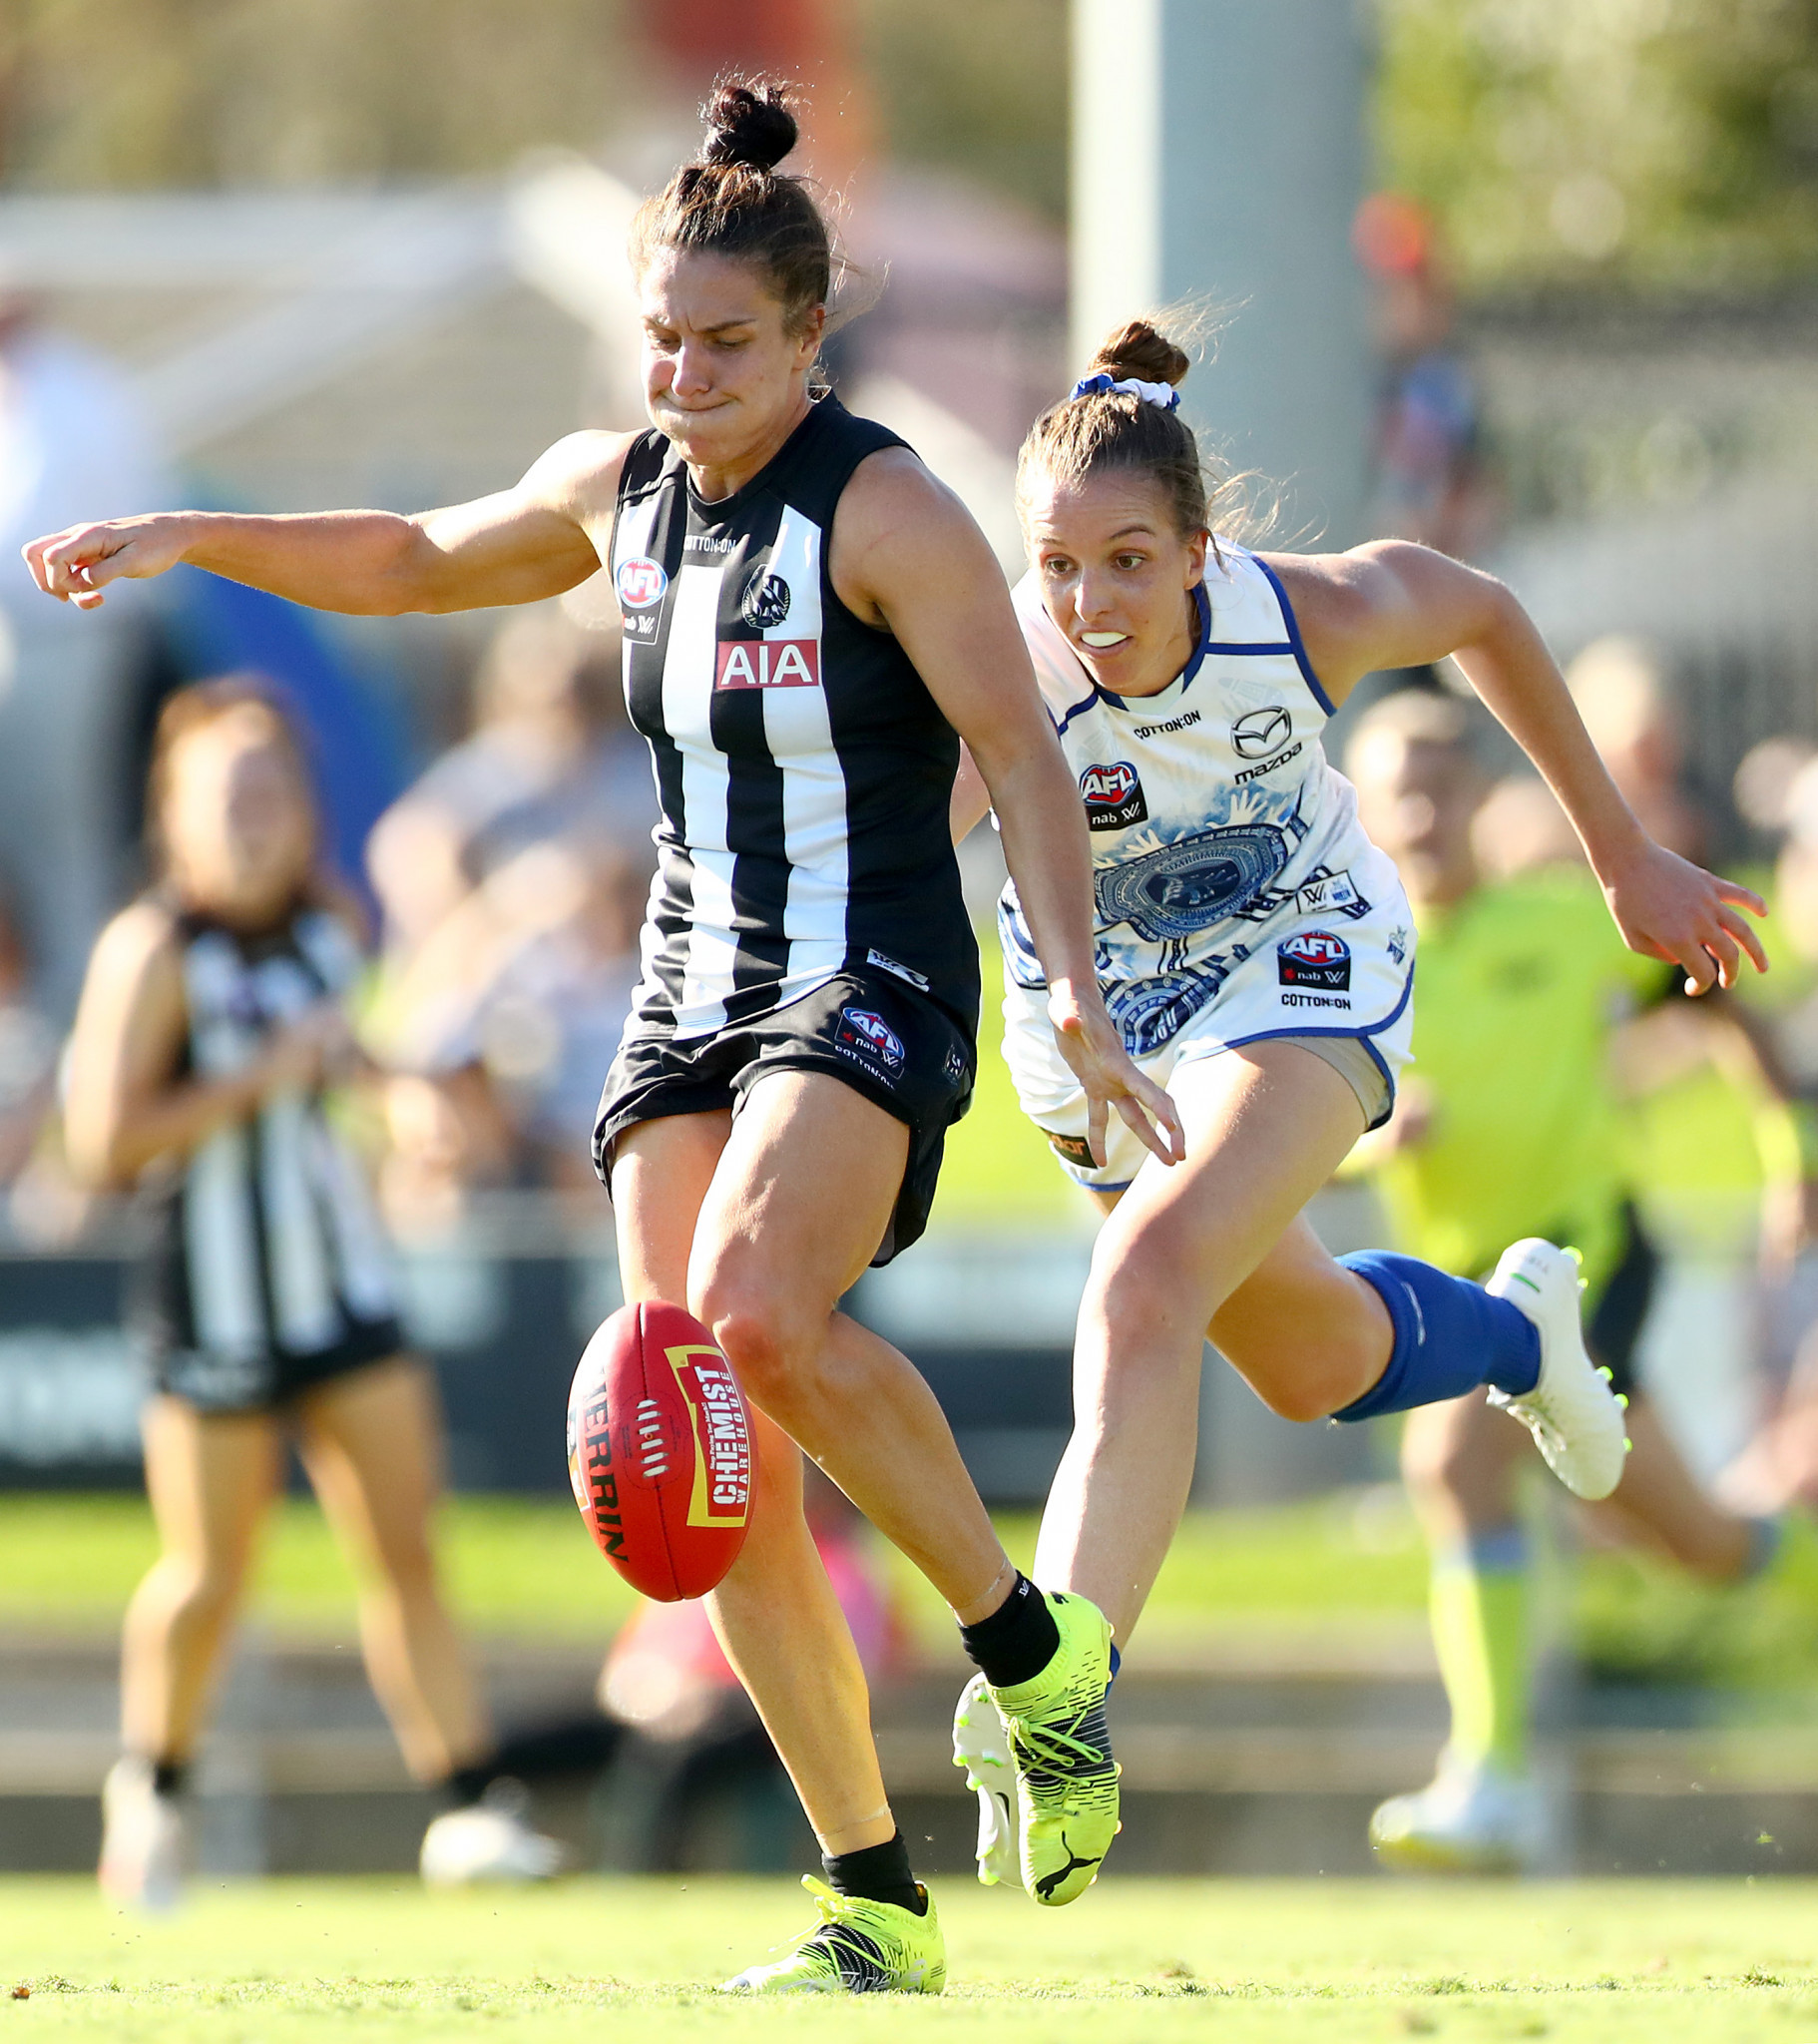 Ash Brazill has played for Collingwood in the AFLW since 2017 but is taking a year off to try to get selected for Birmingham 2022 ©Getty Images